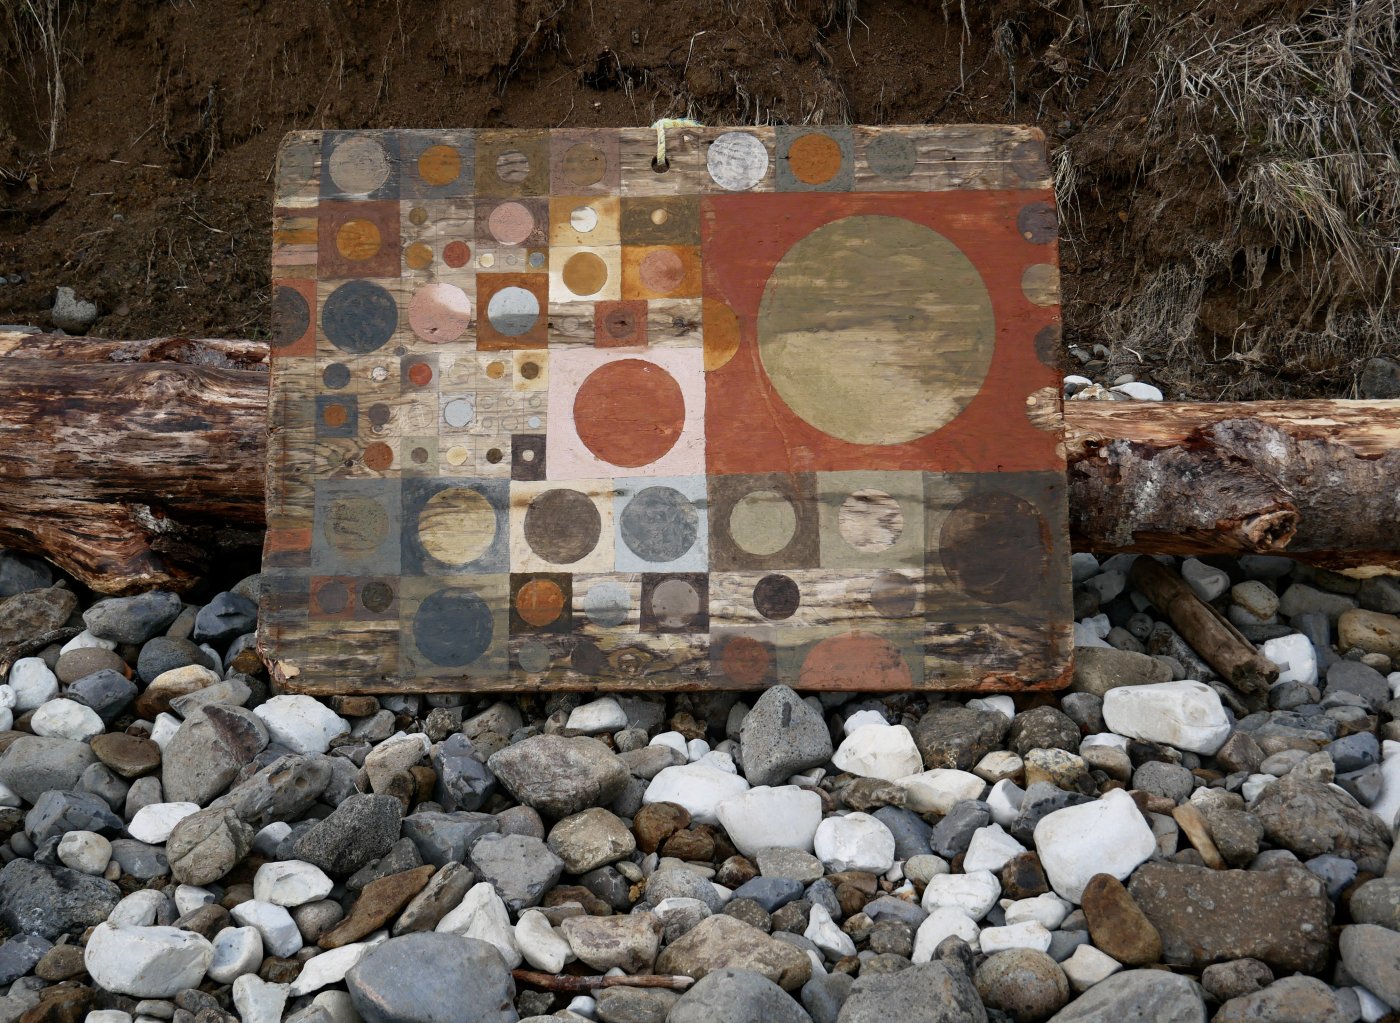 Mineral pigments found and prepared on-site, flotsam driftwood by Tilke Elkins.